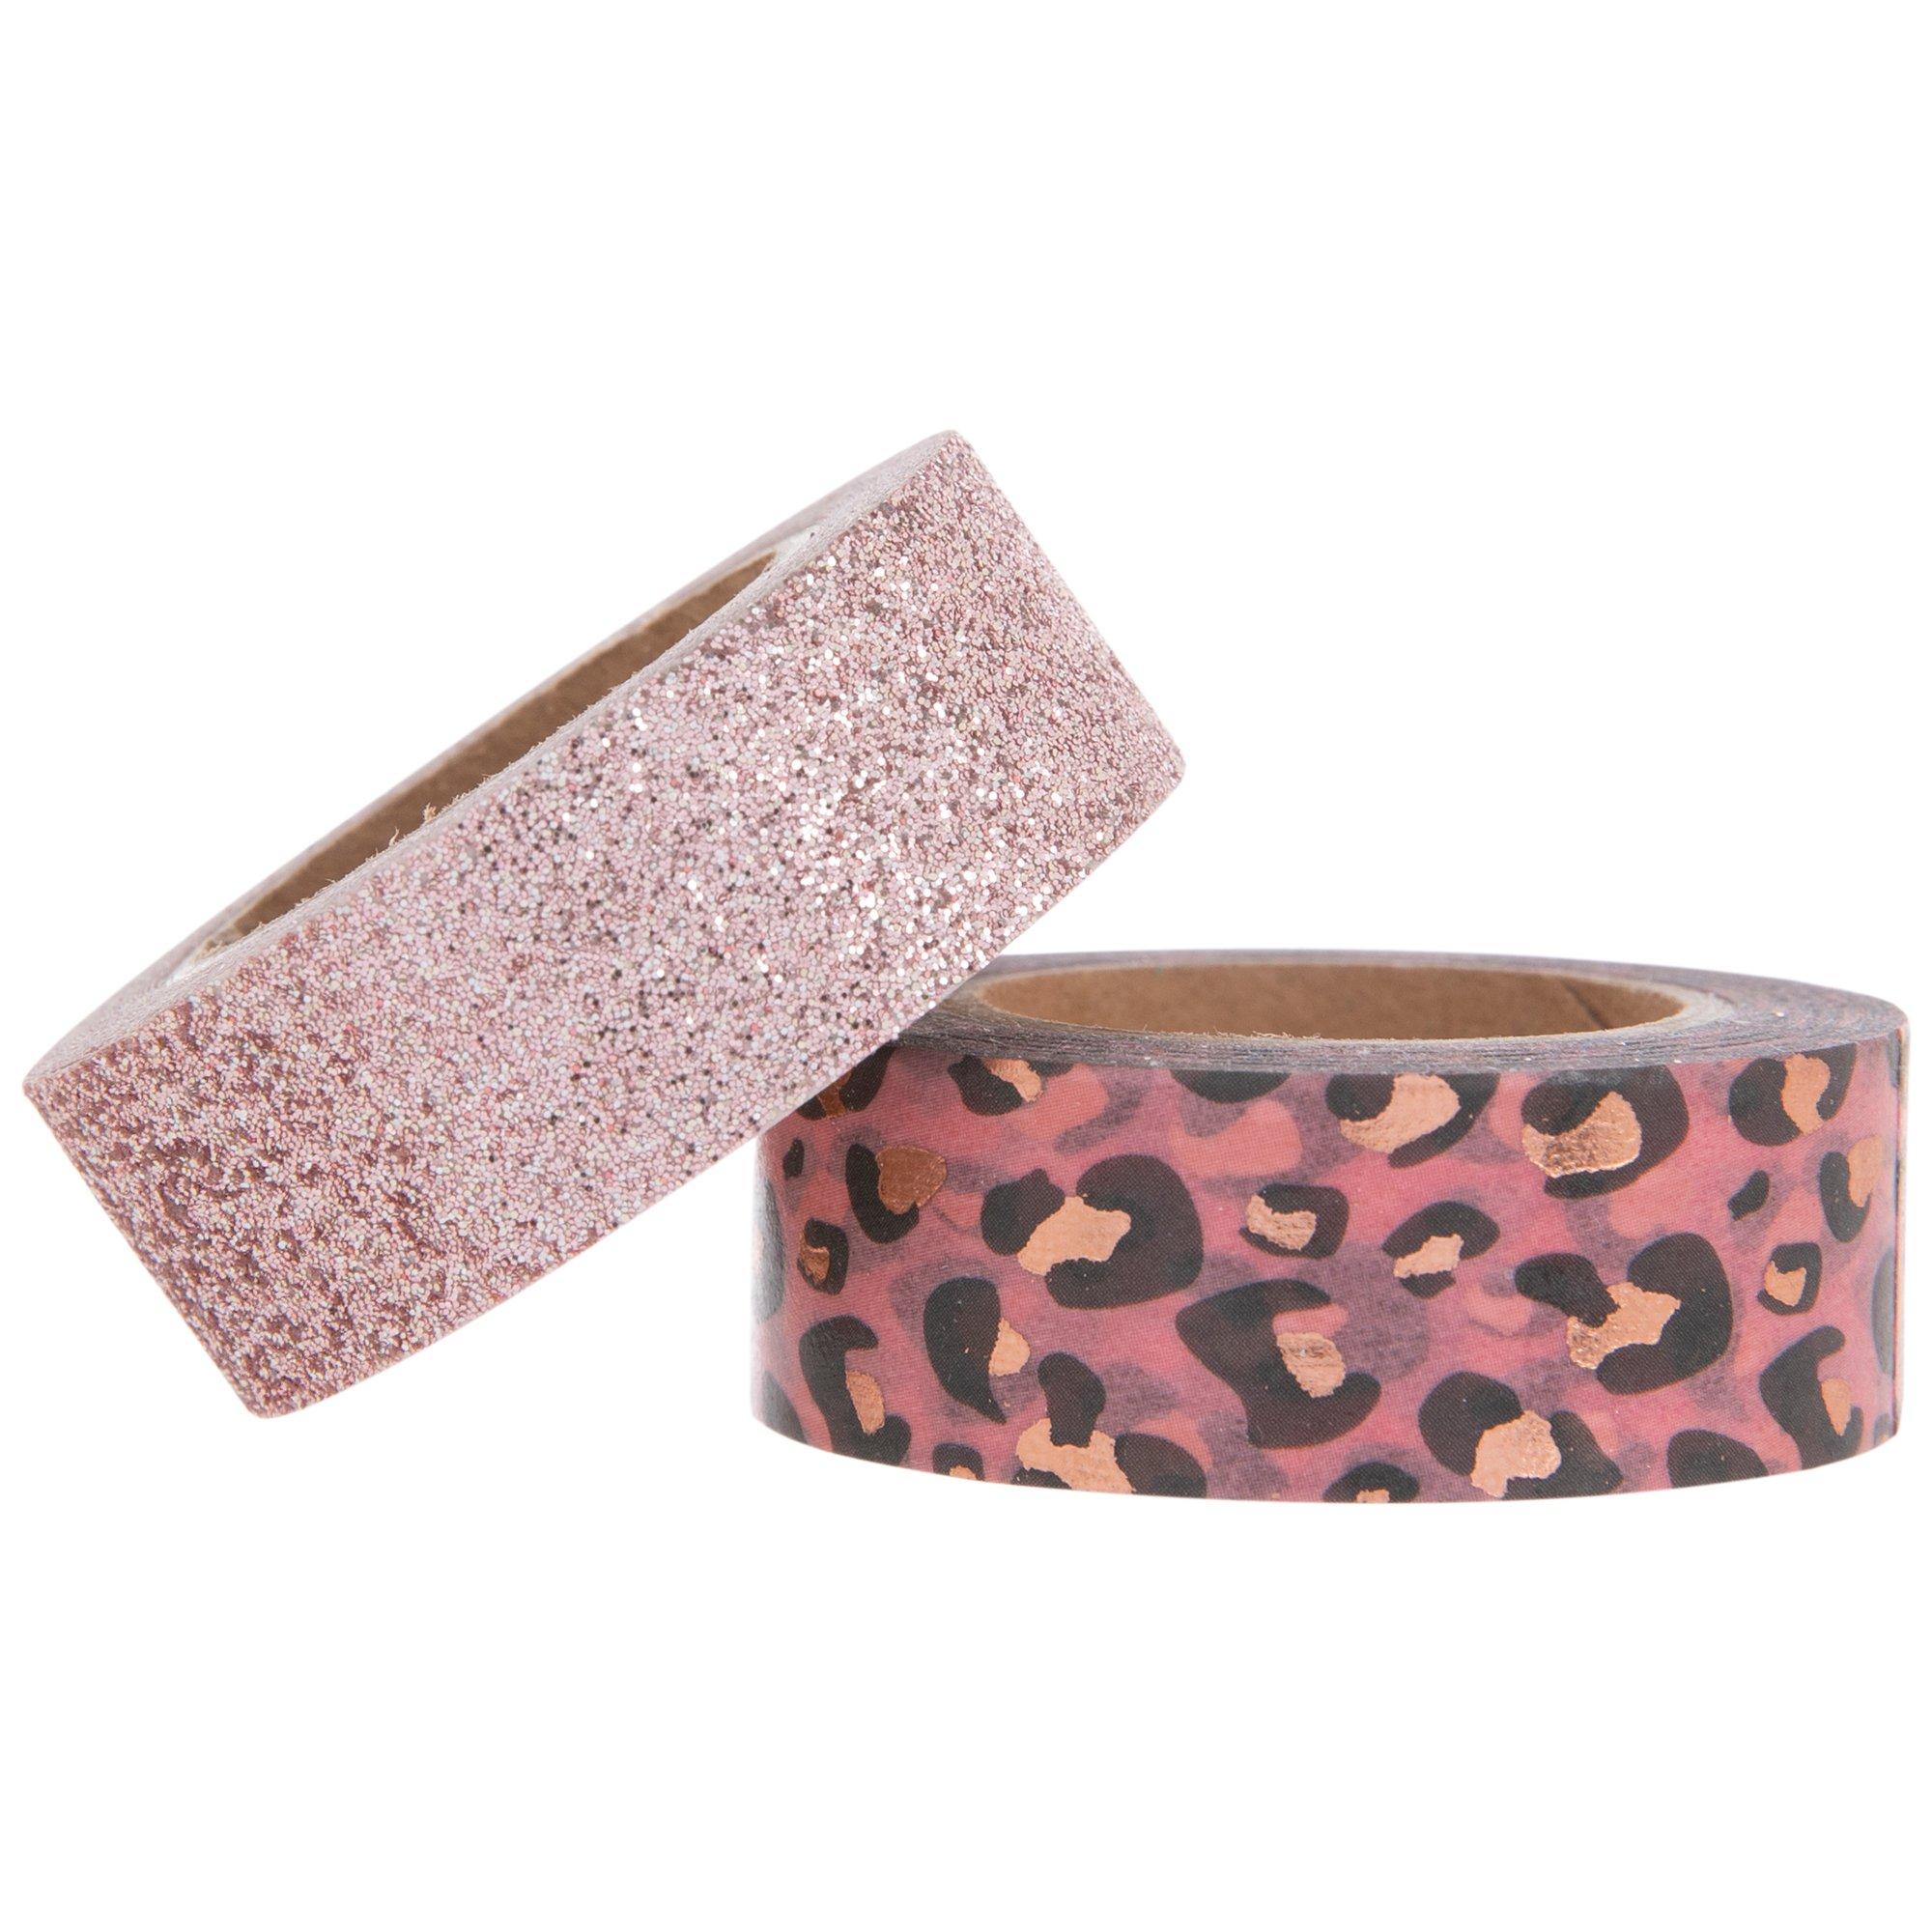 Hot Pink Tiger Print Glitter Tape - Pink and Silver 15mm x 5m - Craft  Supply Planners Decoration Card Making Gift Wrap